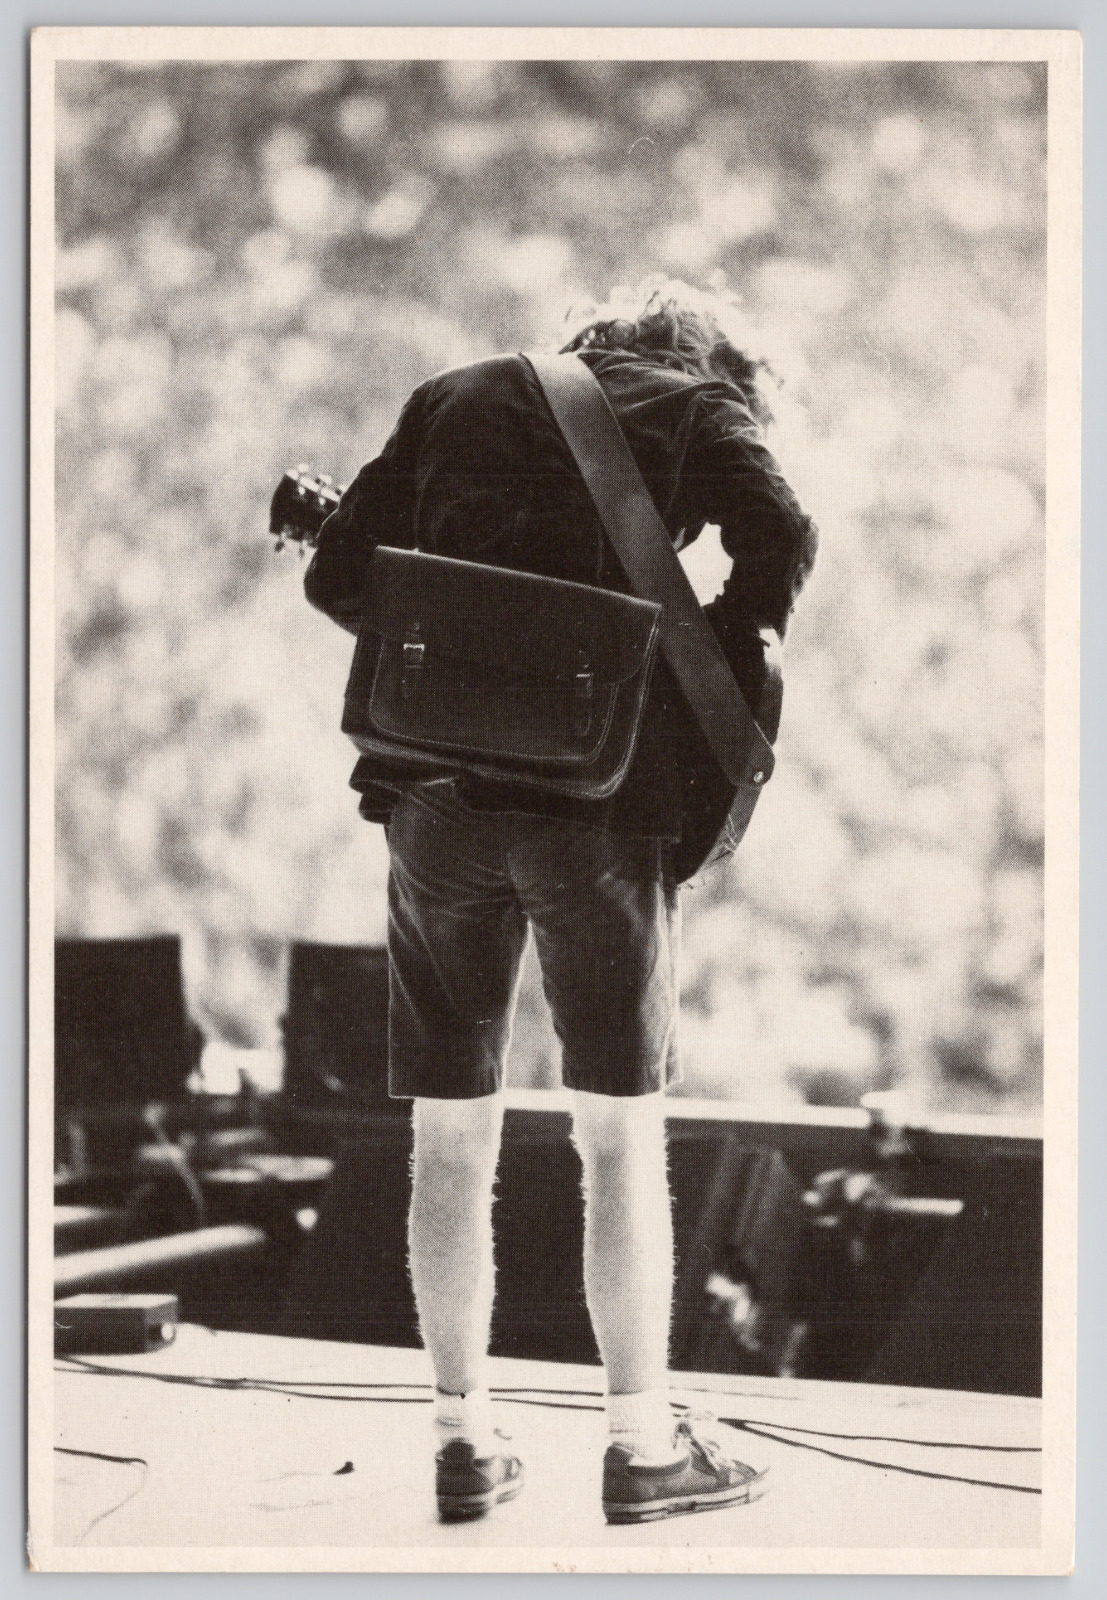 Angus Young of AC/DC Band in Concert 6x4 Chrome Postcard by UK Statics